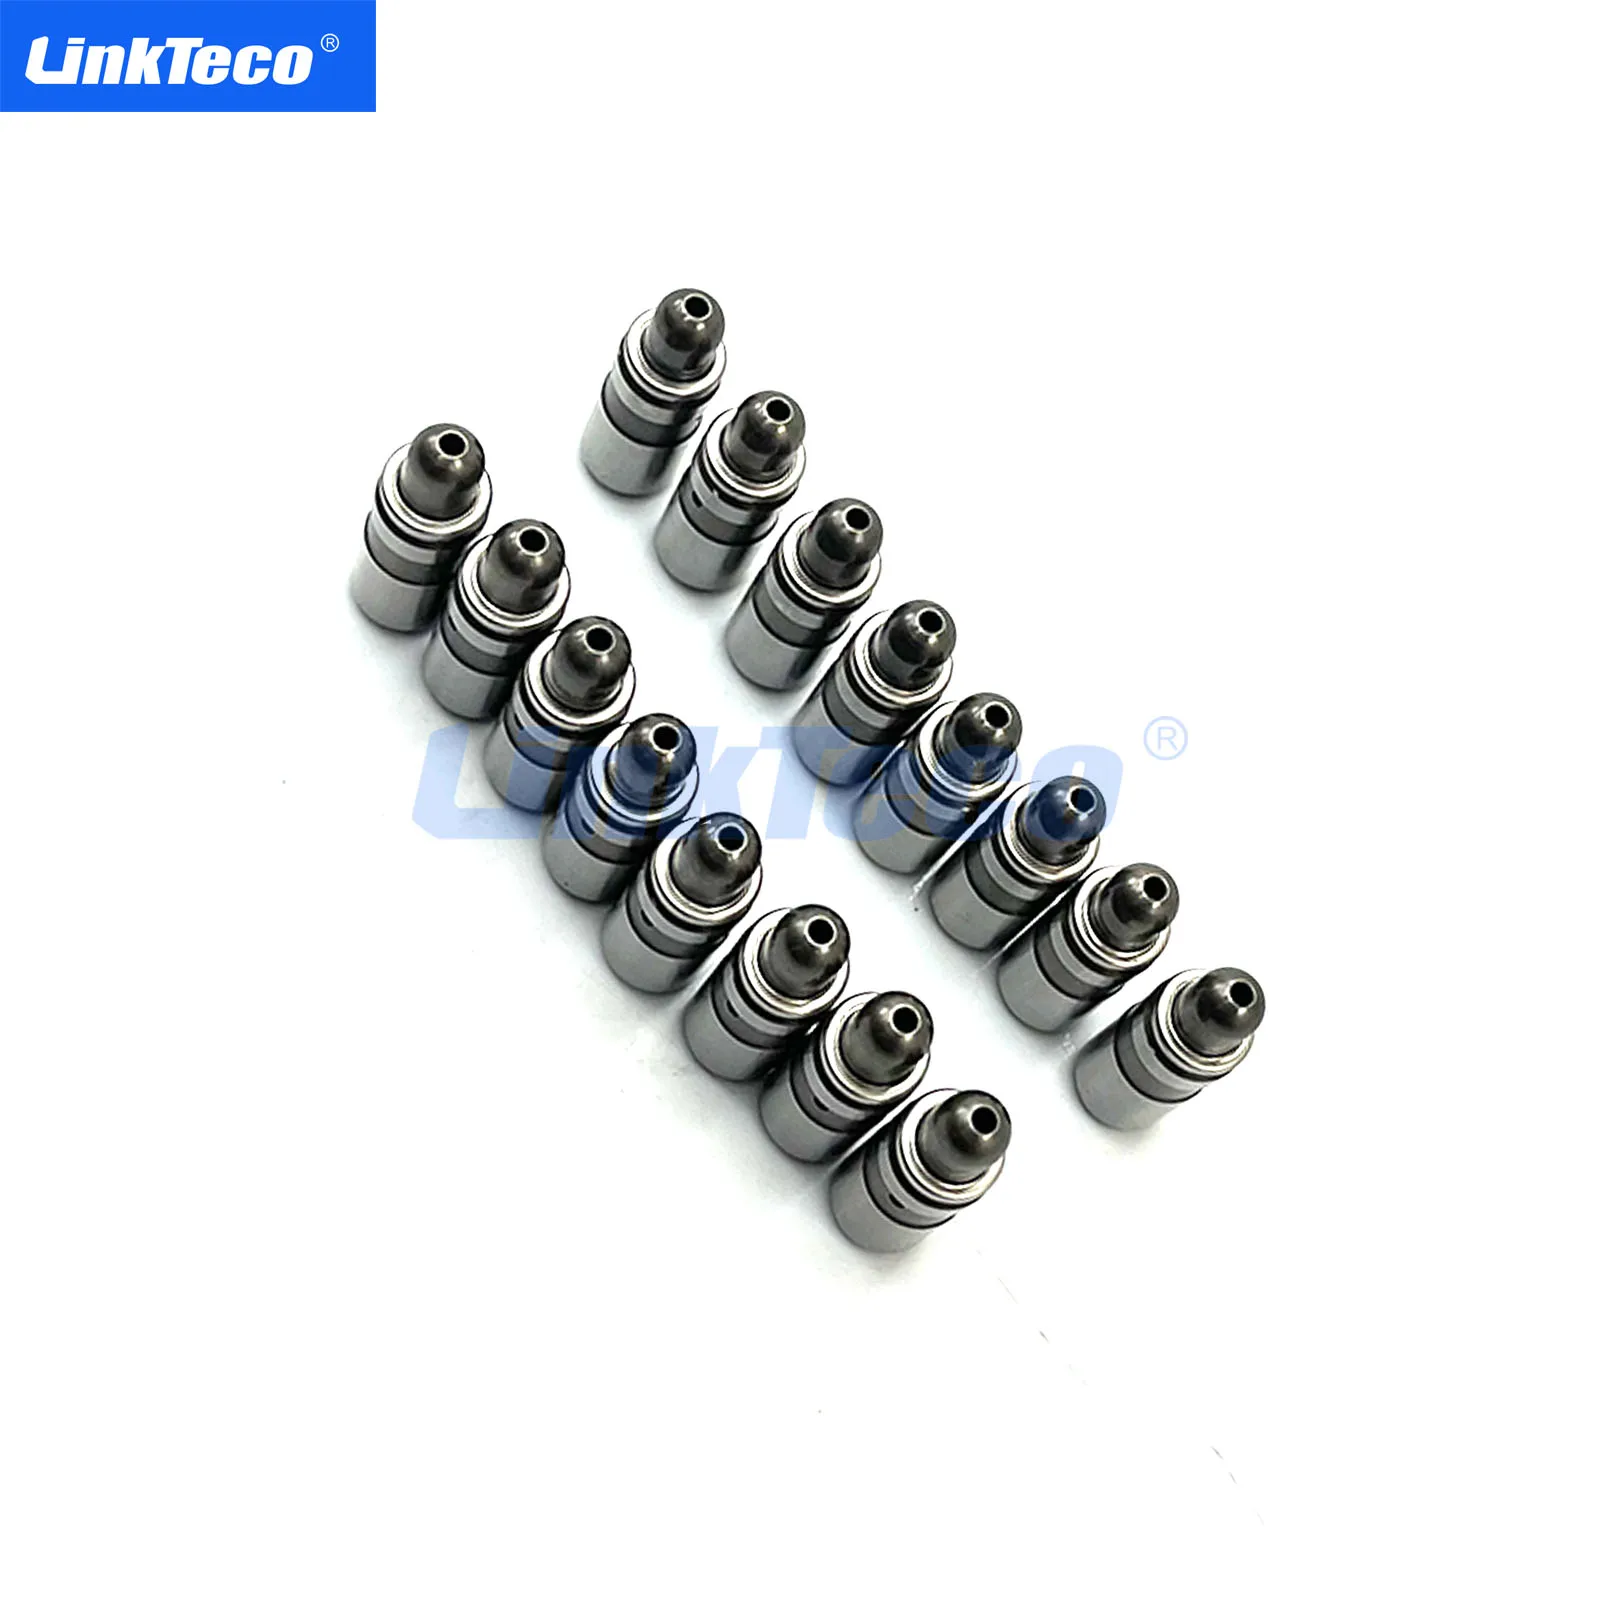 16 Valve Lifters For Cadillac Chevrolet Buick GMC HL129 OEM 12572638  AliExpress